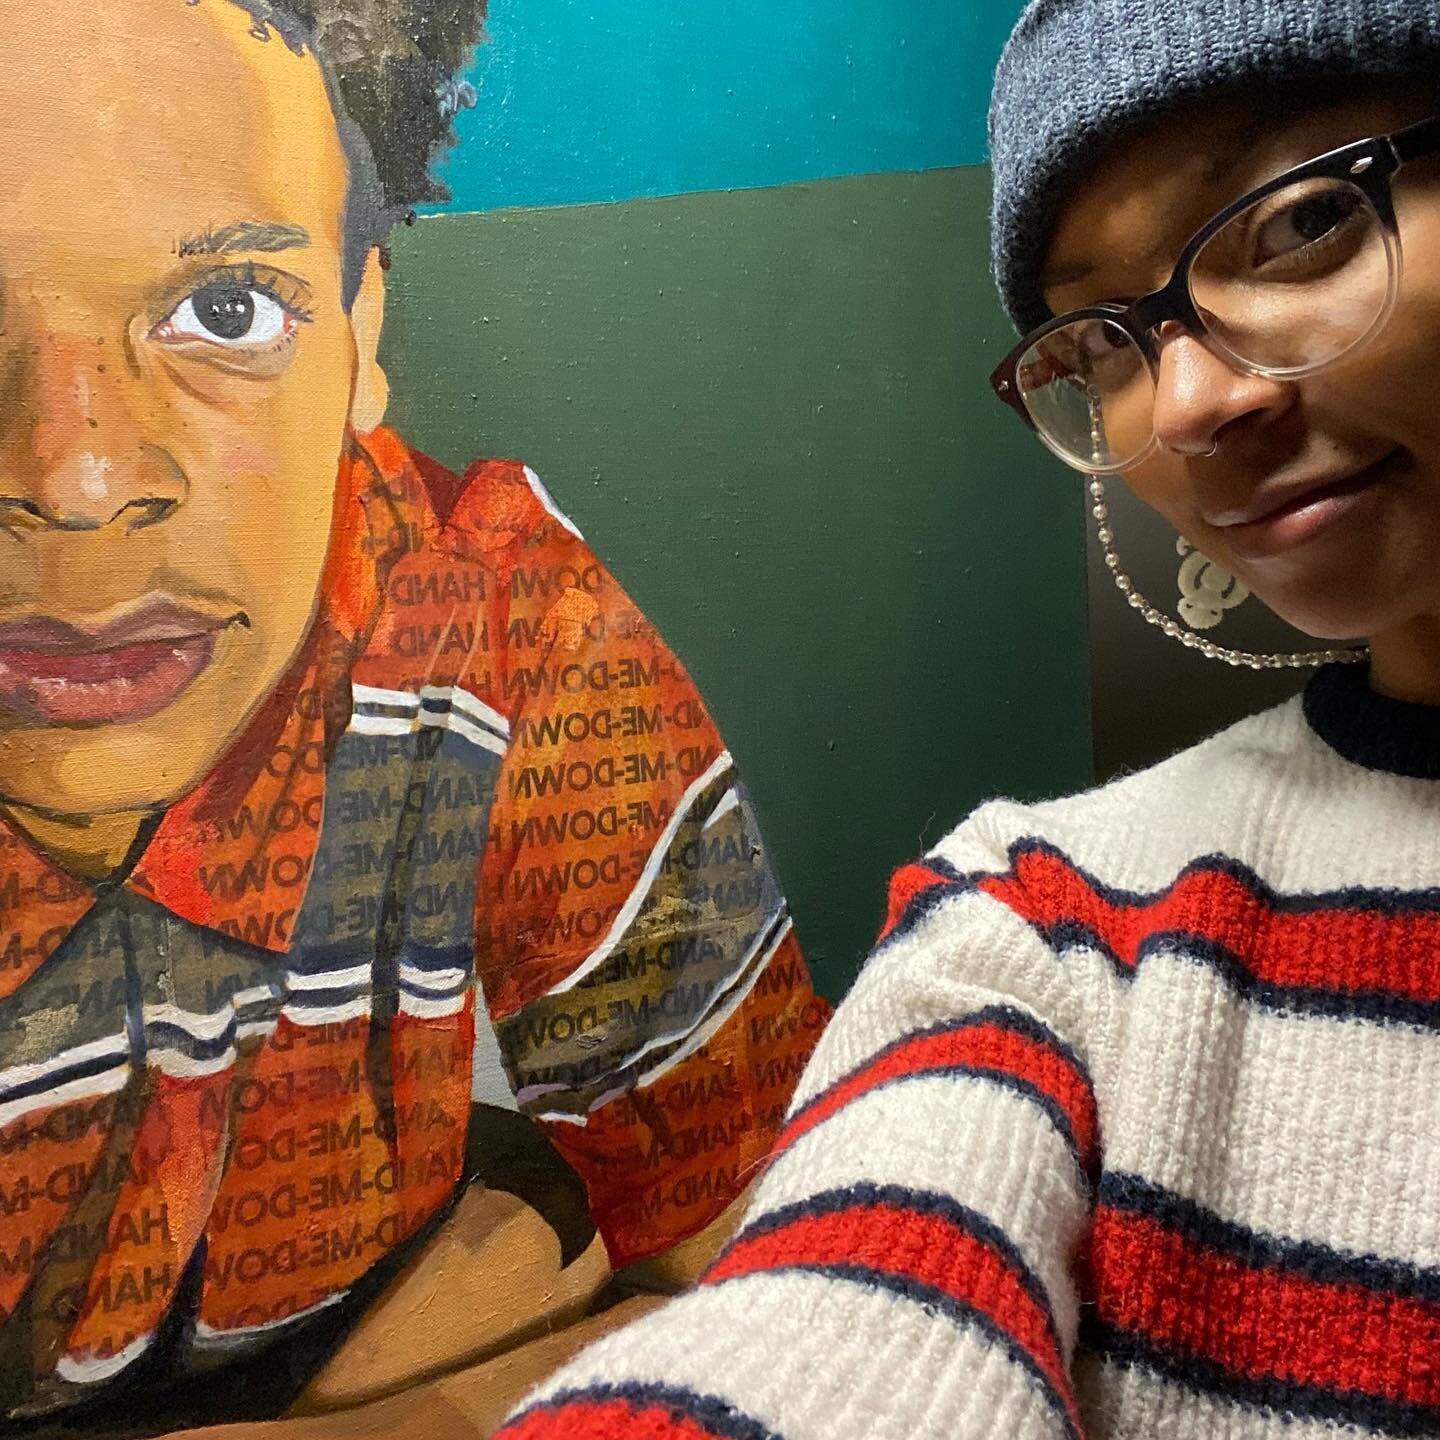 New Patreon vid: How to Honor and Enhance your Creativity will be up at 6pm MST tonight!! I&rsquo;d love for you all to check it out. Link in bio. 
.
.
.
#blackart #denverartist #coloradoartist #womenpainter #tyreejones #tyreejoart #fyp #happynewyear